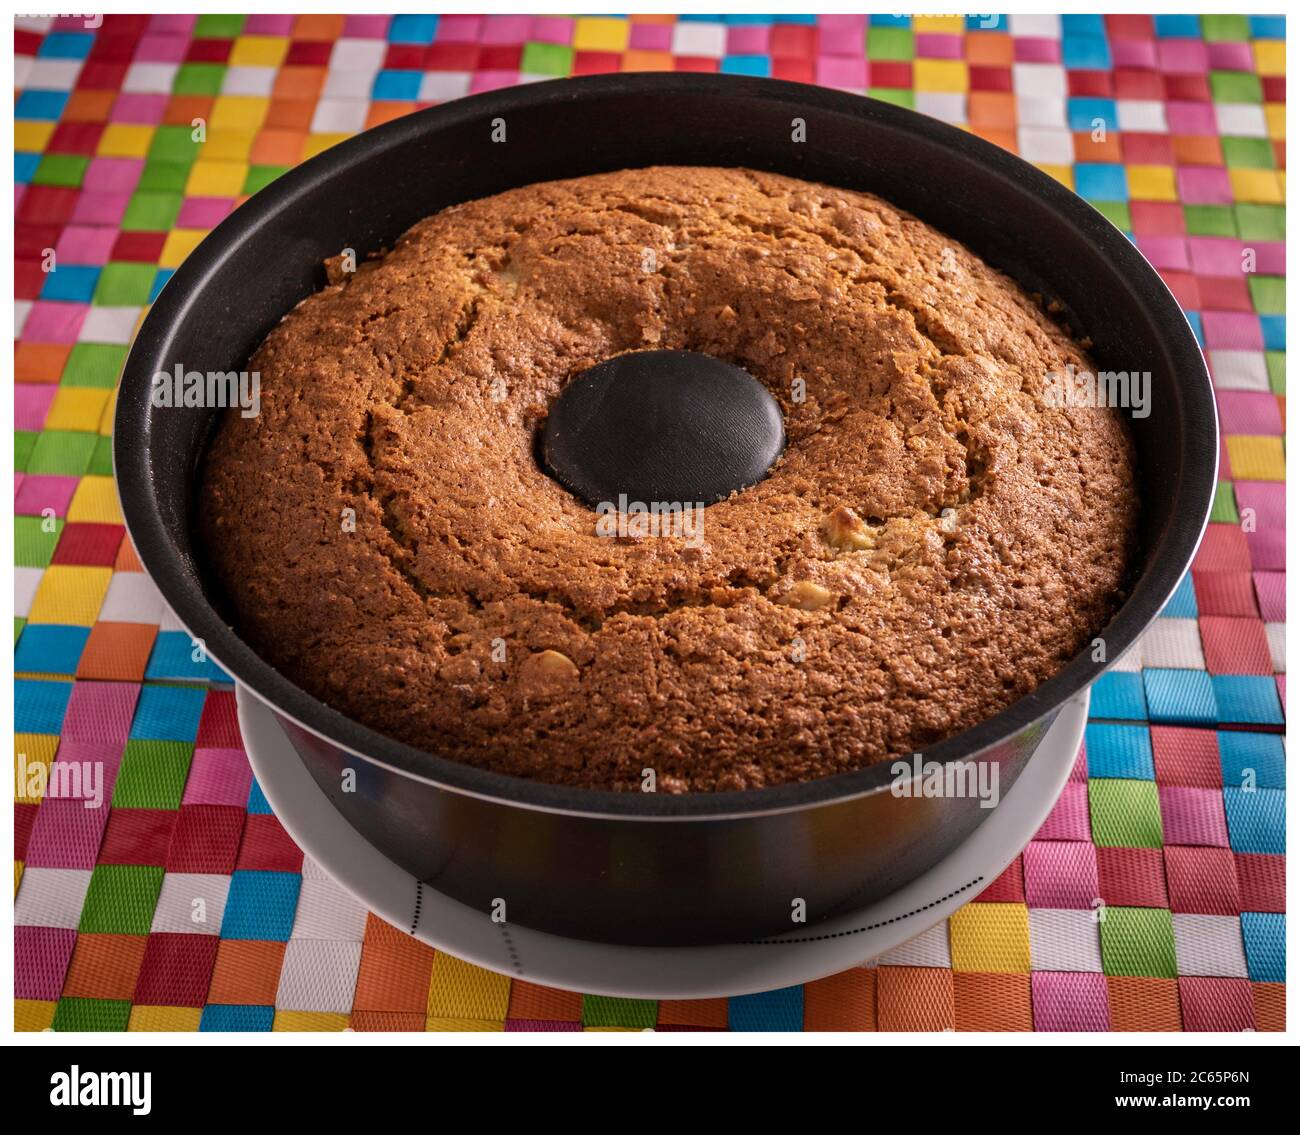 apple cake on a color table Stock Photo